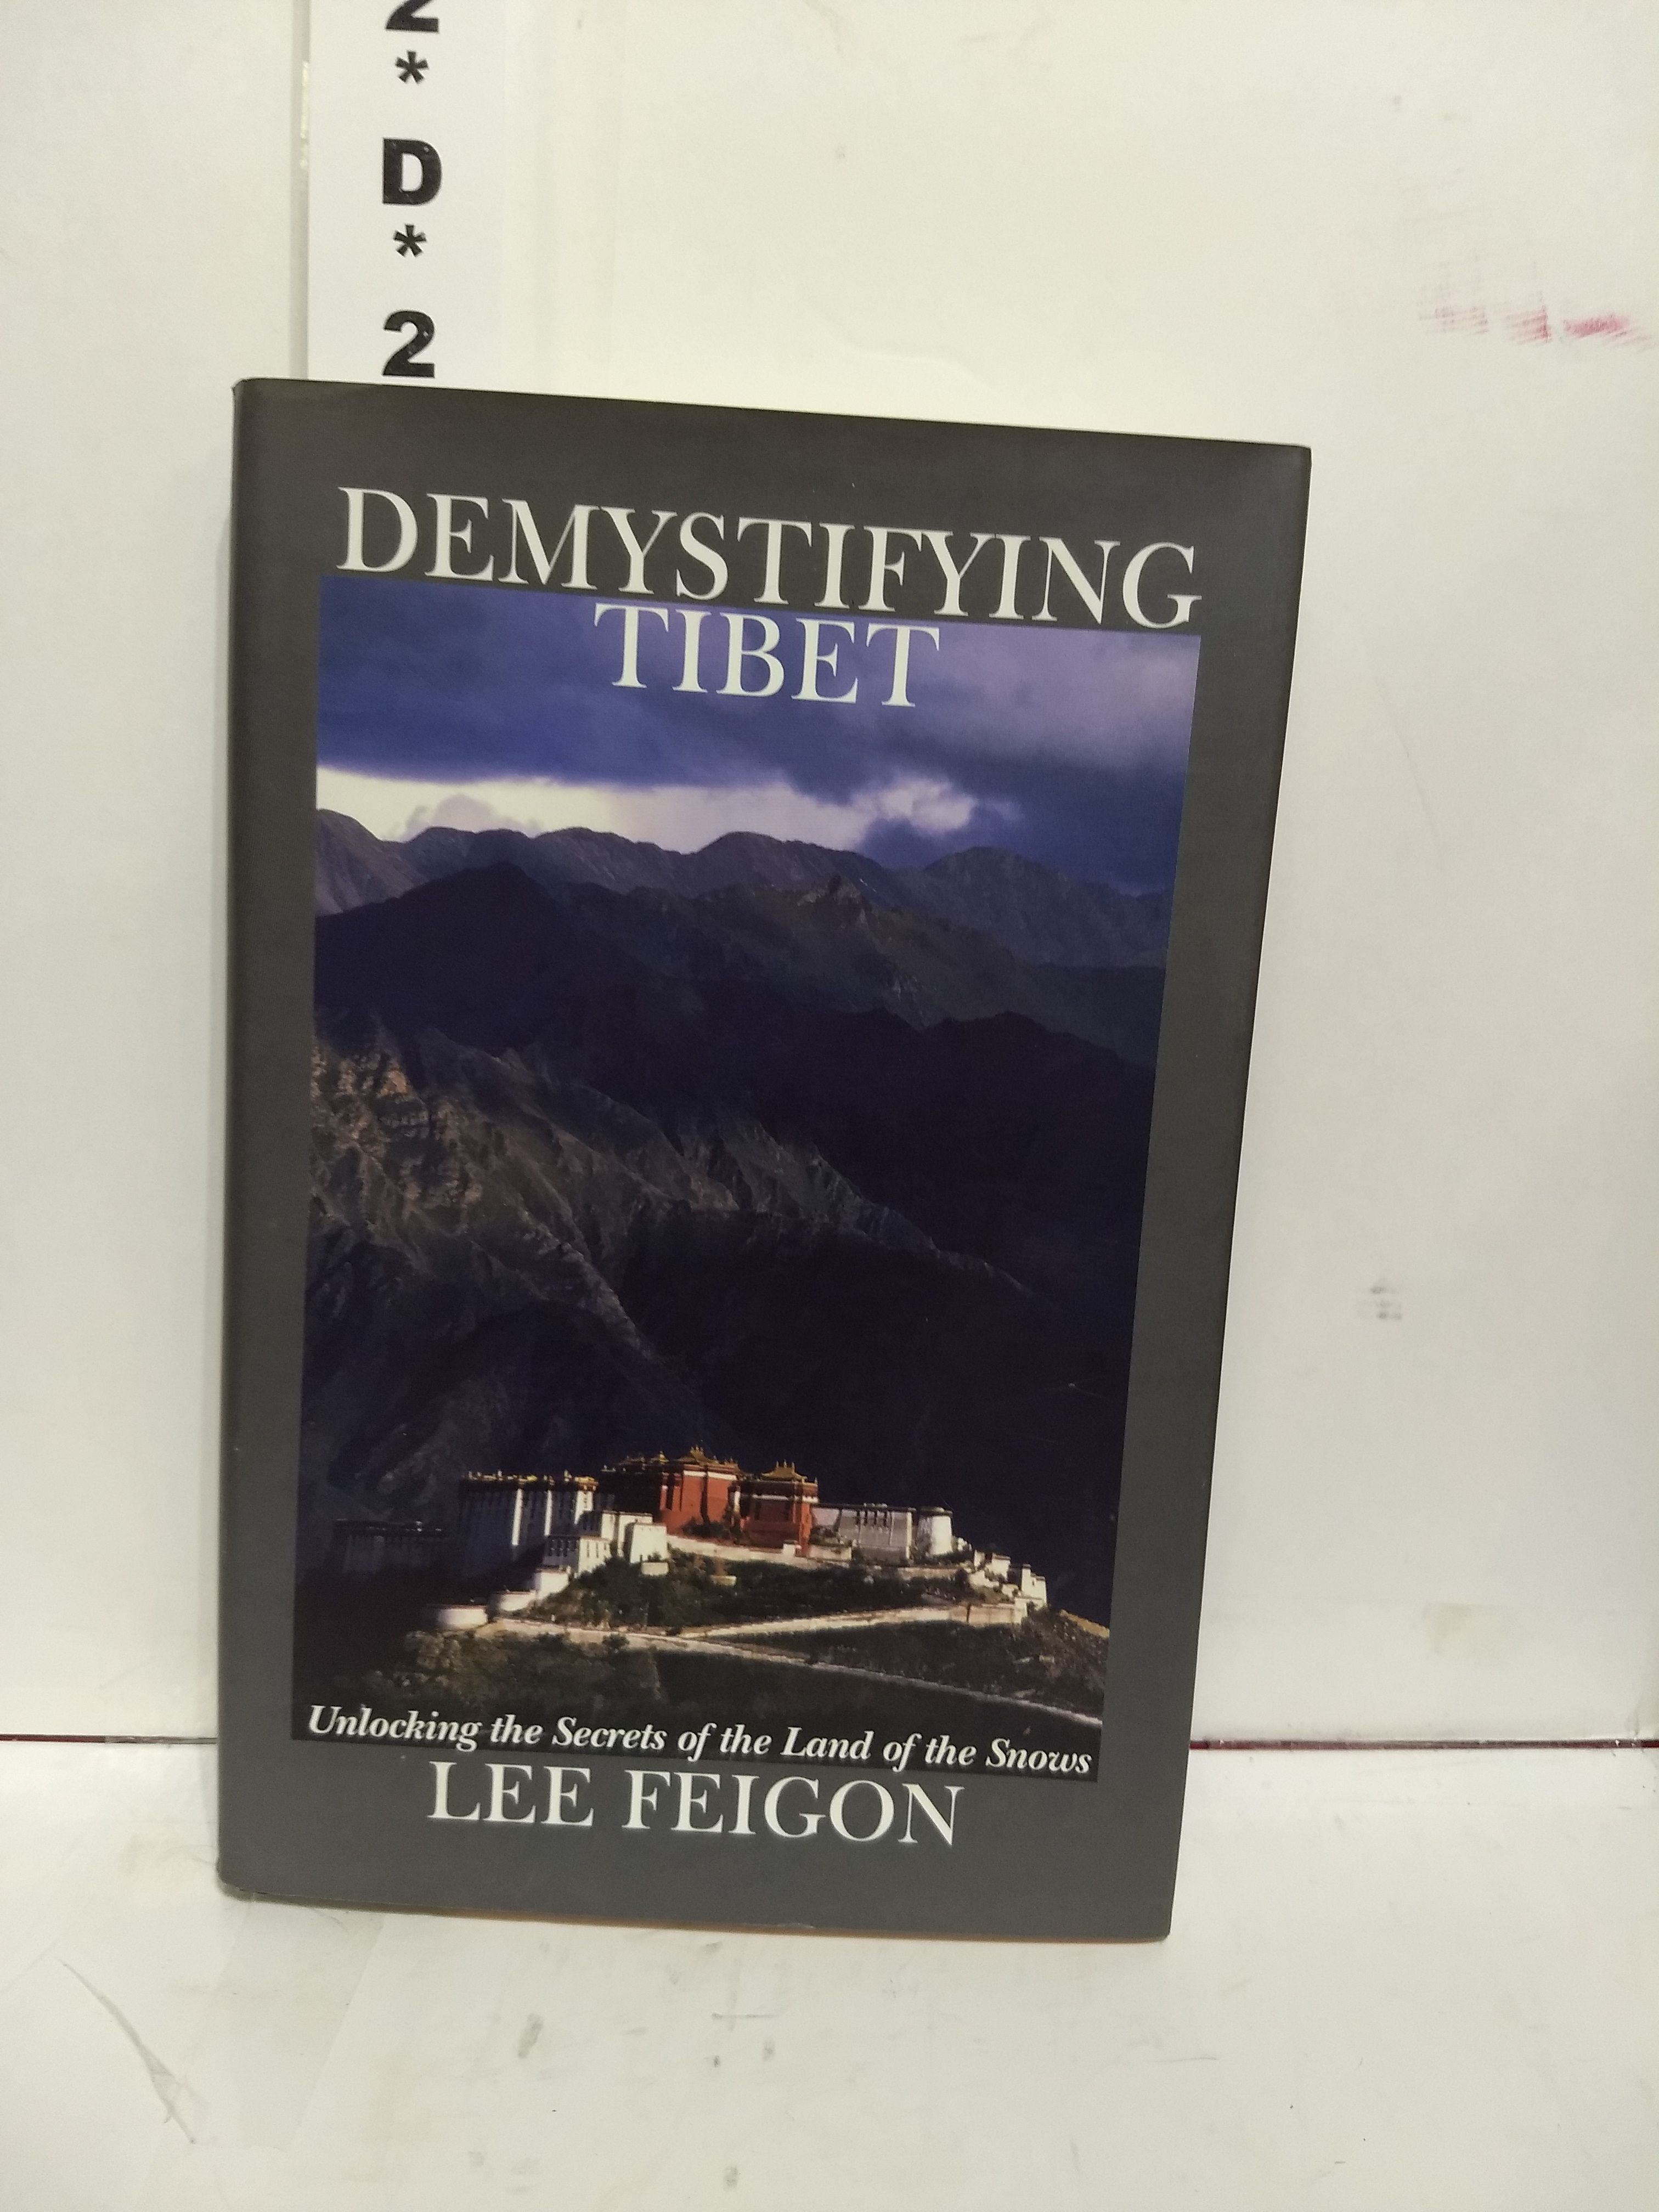 Demystifying Tibet: Unlocking the Secrets of the Land of the Snows - Lee Feigon